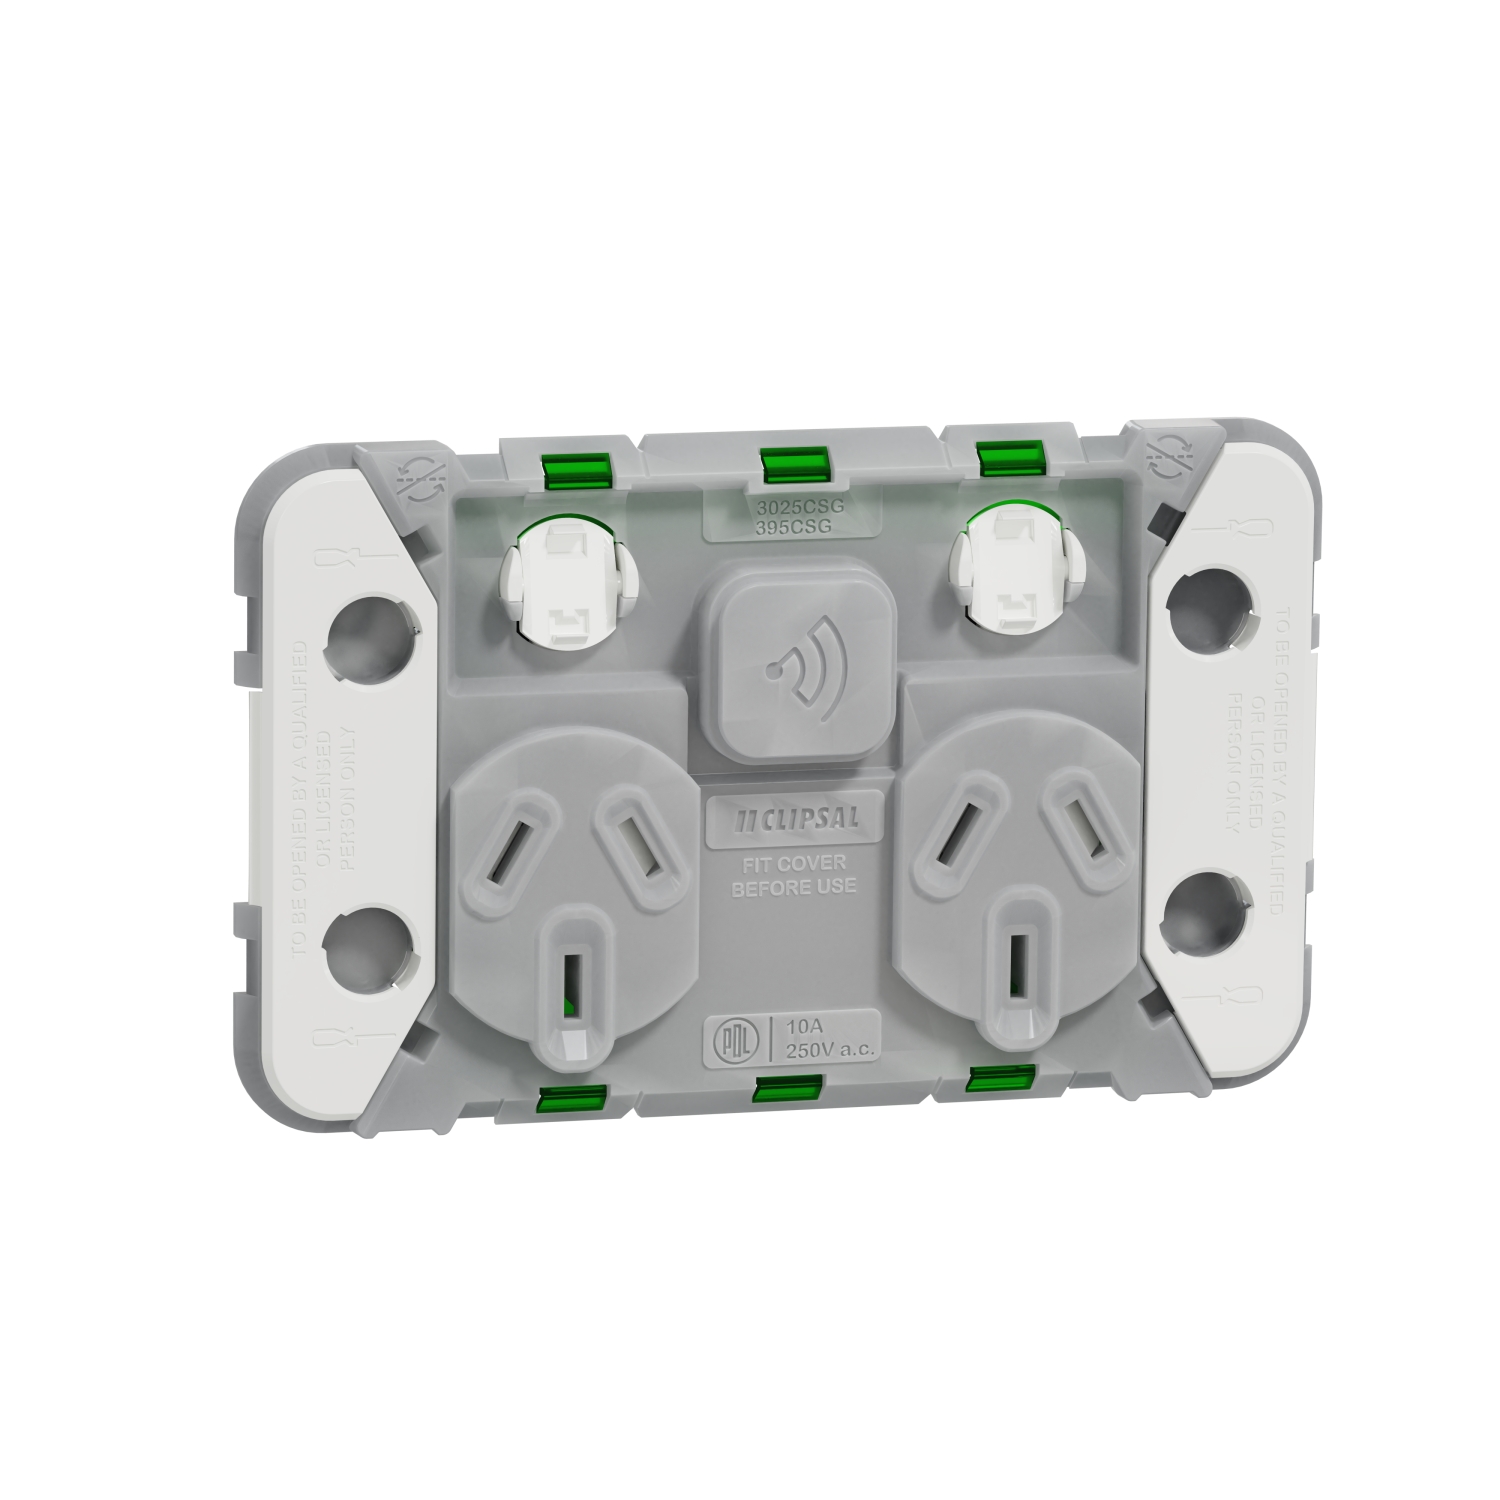 PDL395CSGZ - PDL Wiser Double Horizontal Socket Grid, 10A with Zigbee